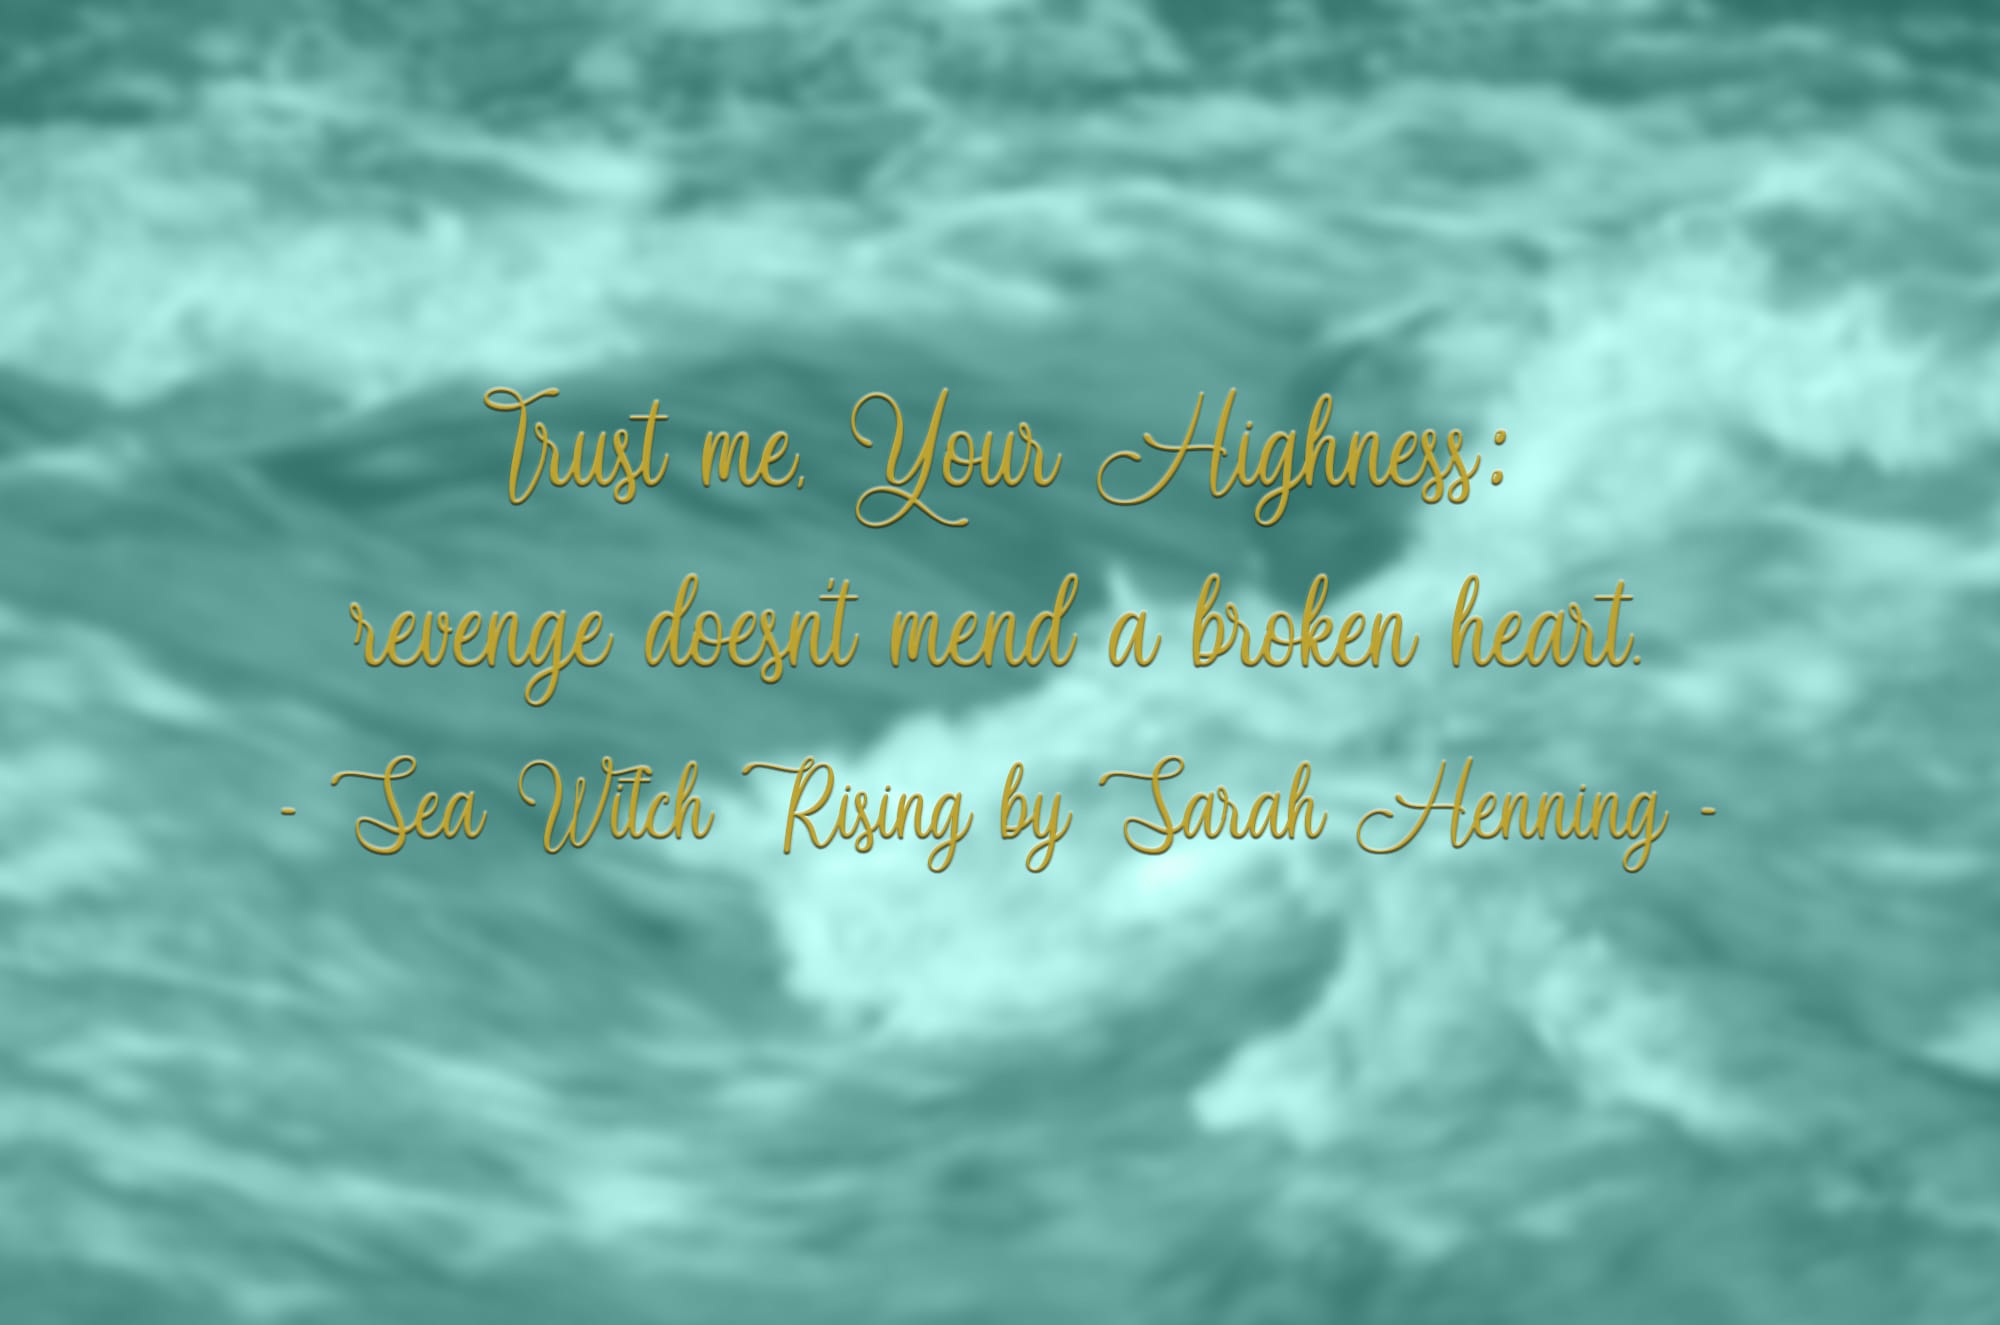 sea witch rising quote 4